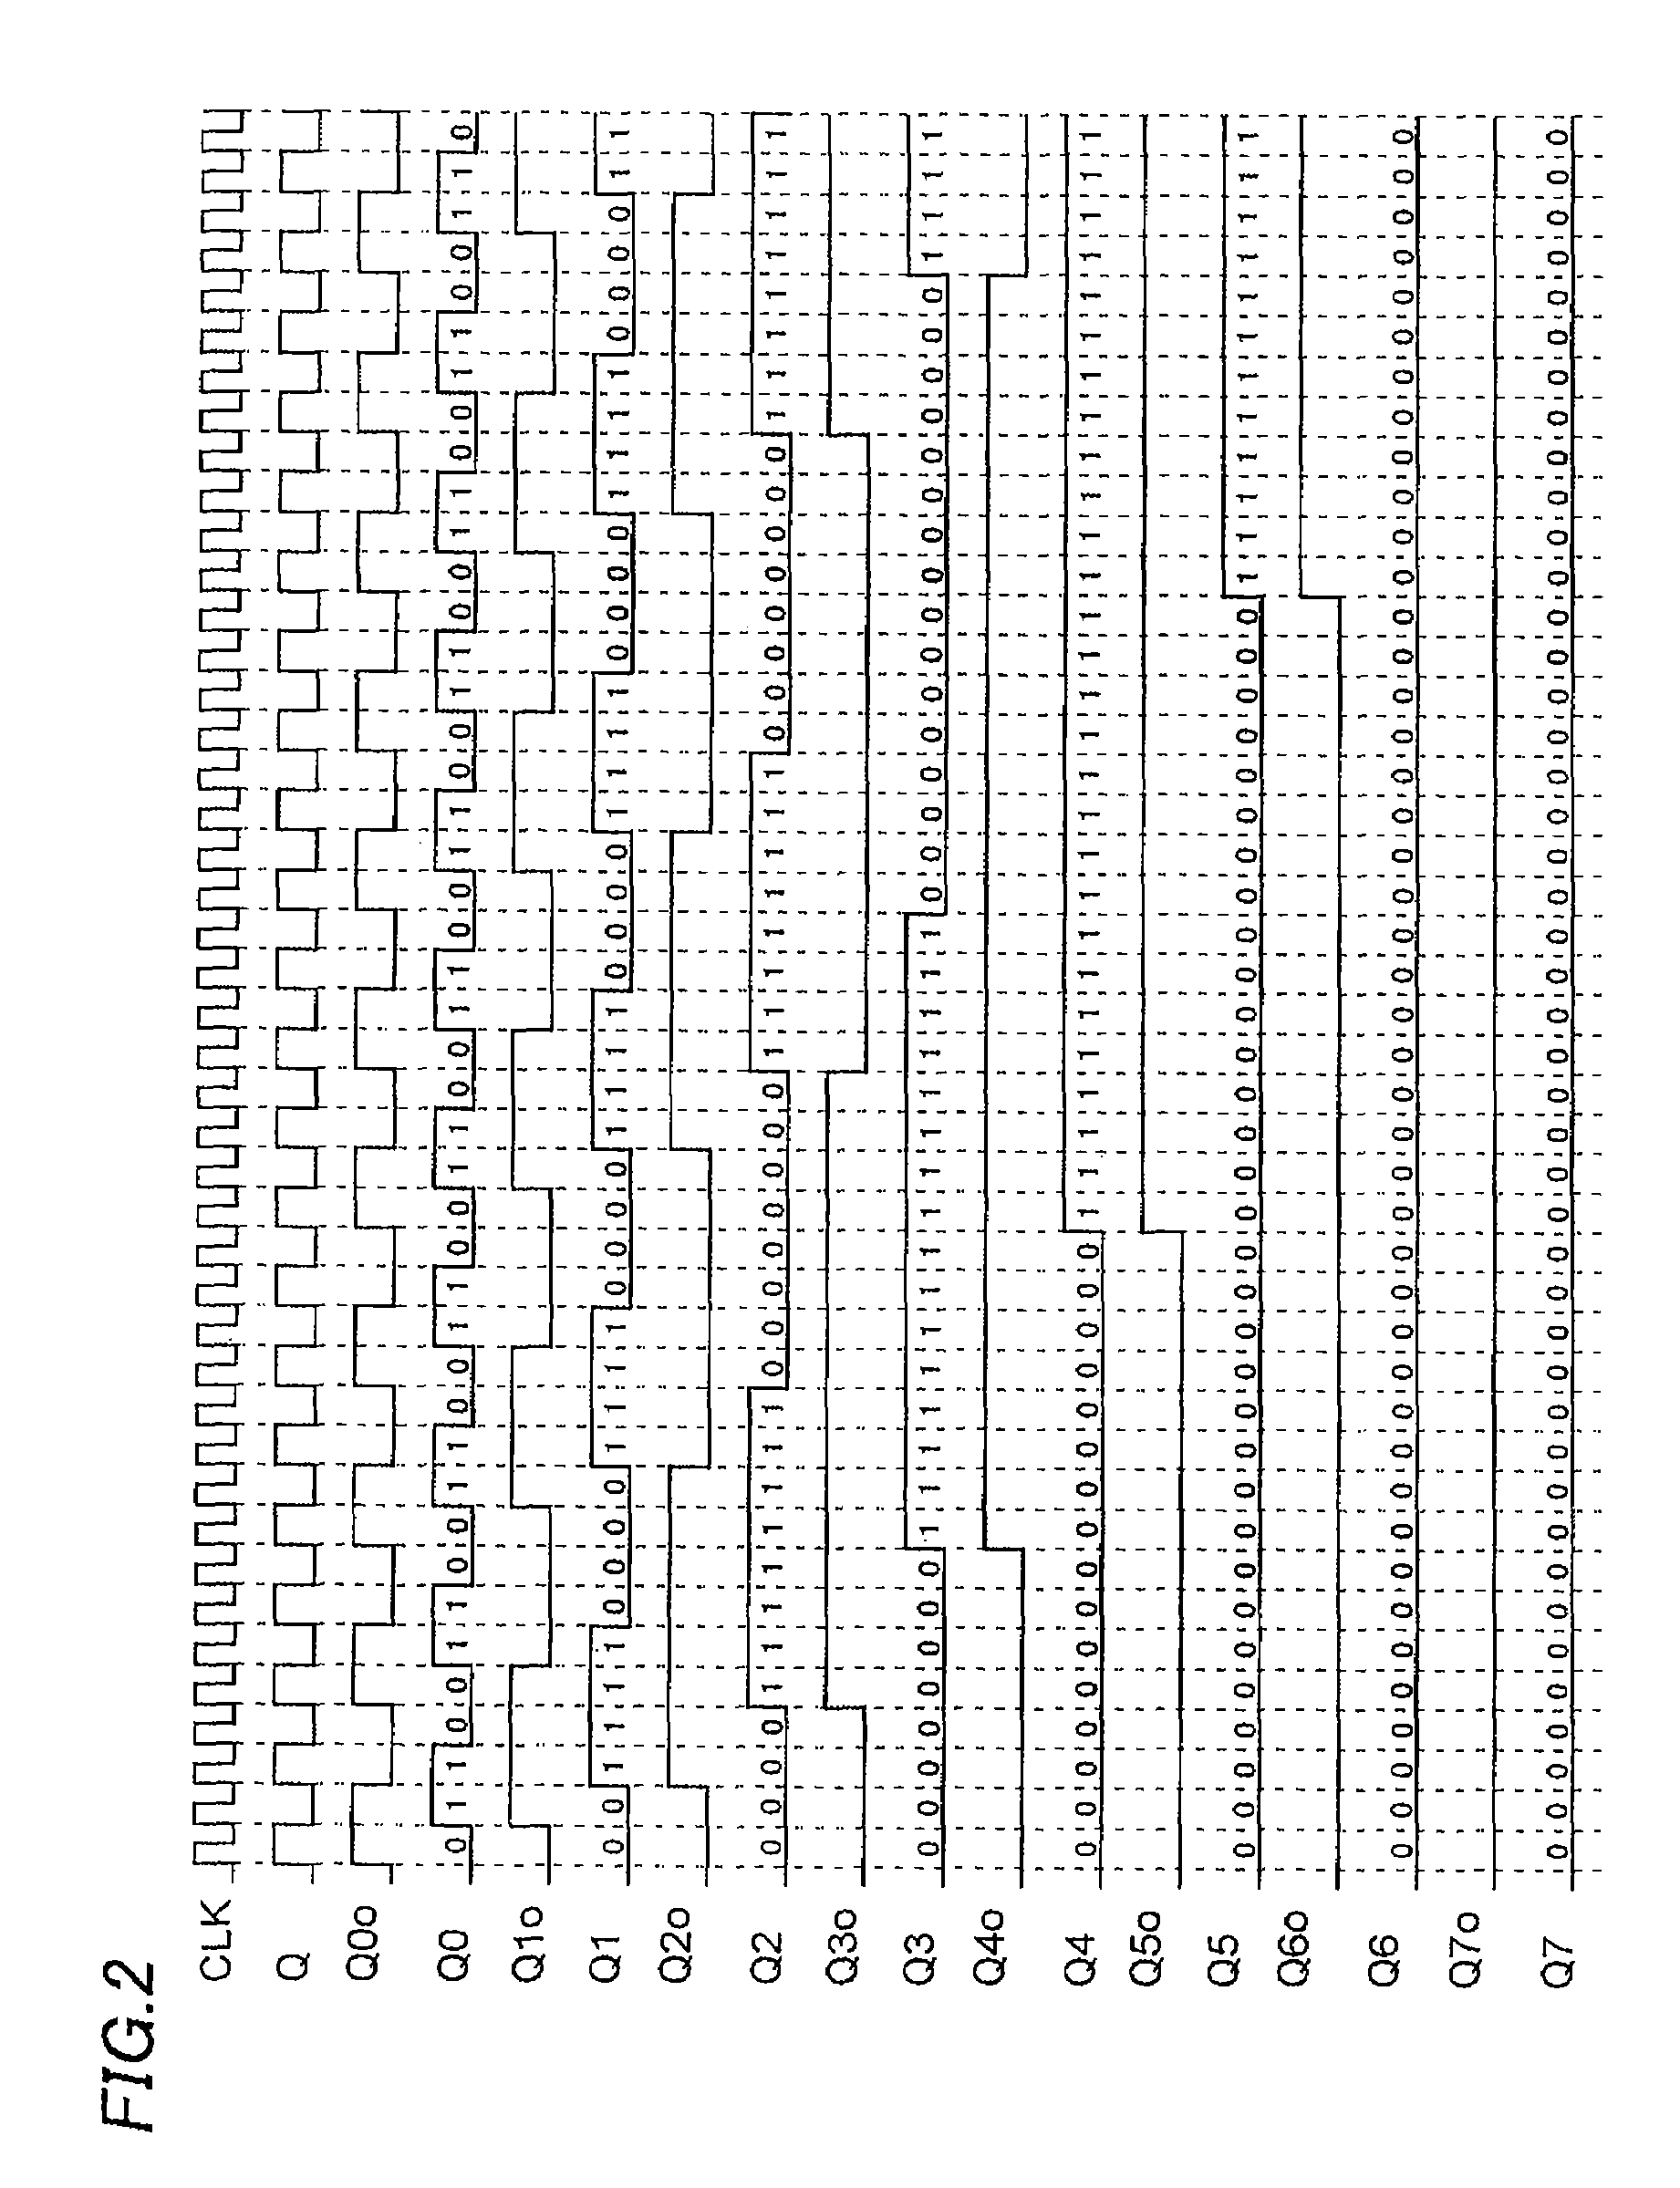 Gray code counter and display device therewith